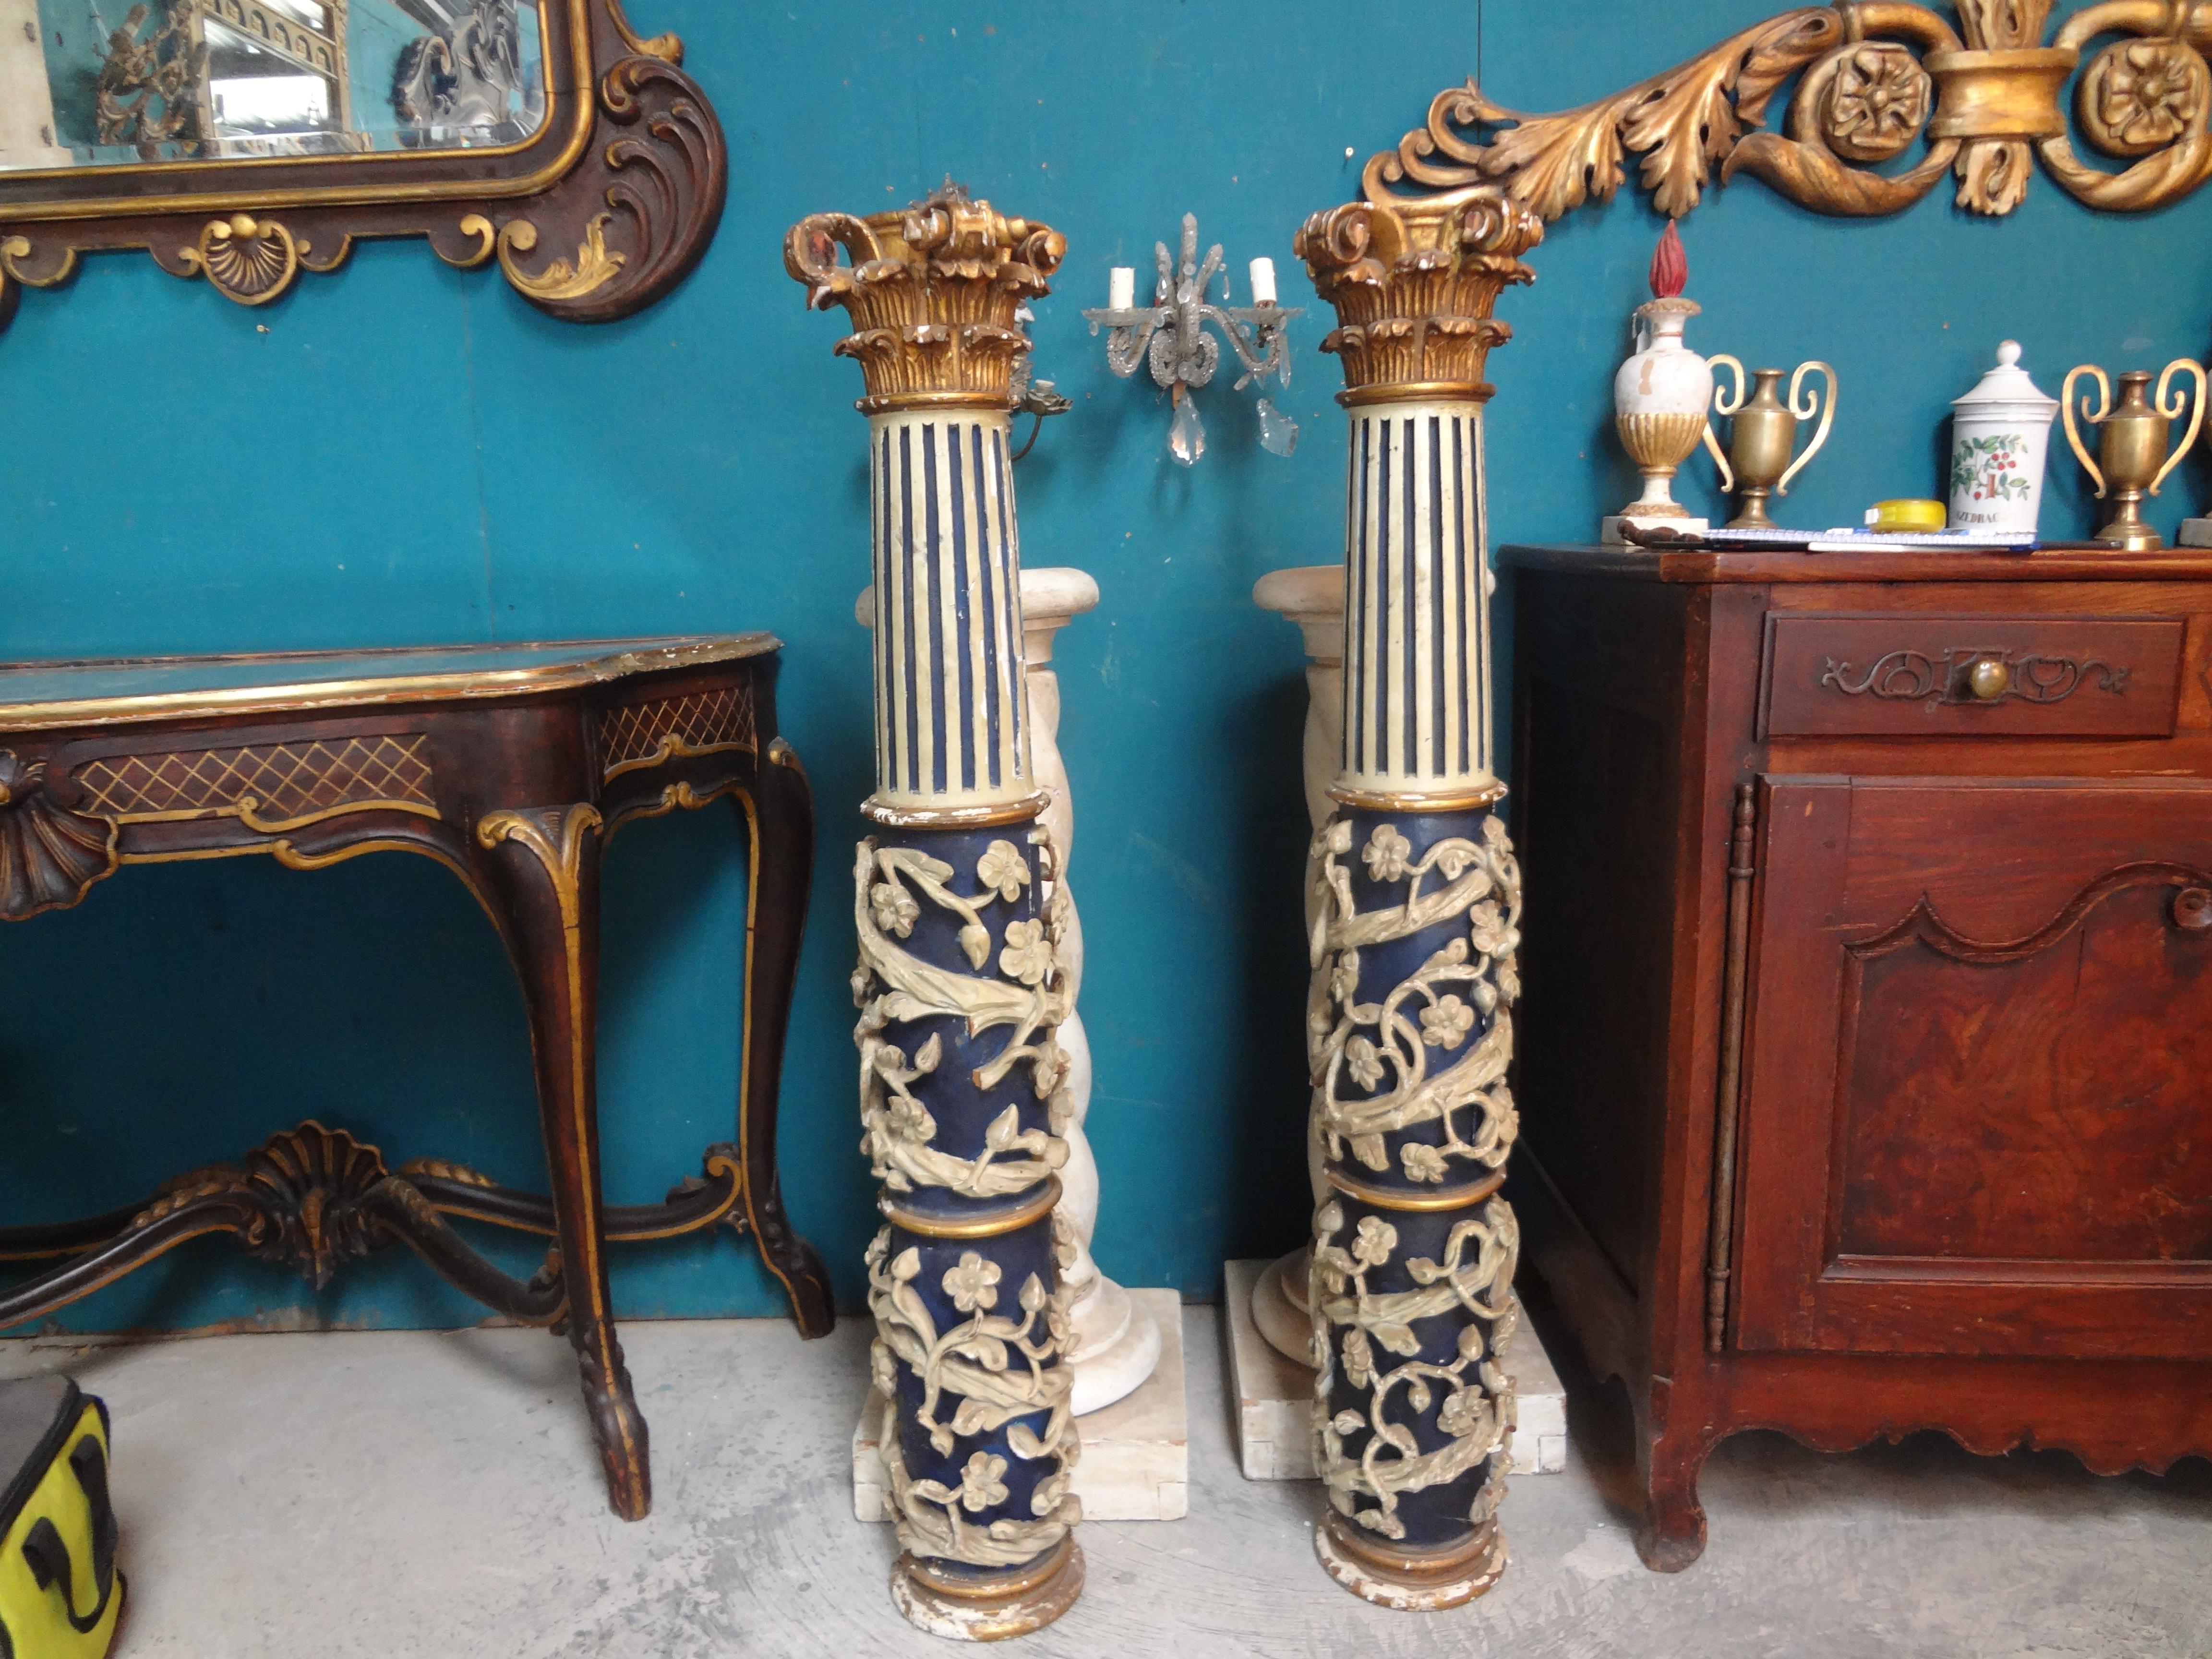 Outstanding pair of 17th century Italian Baroque hand carved columns. These stunning Italian columns are carved out of one piece of wood and have vine and flower relief decoration. They are painted a beautiful blue and cream color with a gilt